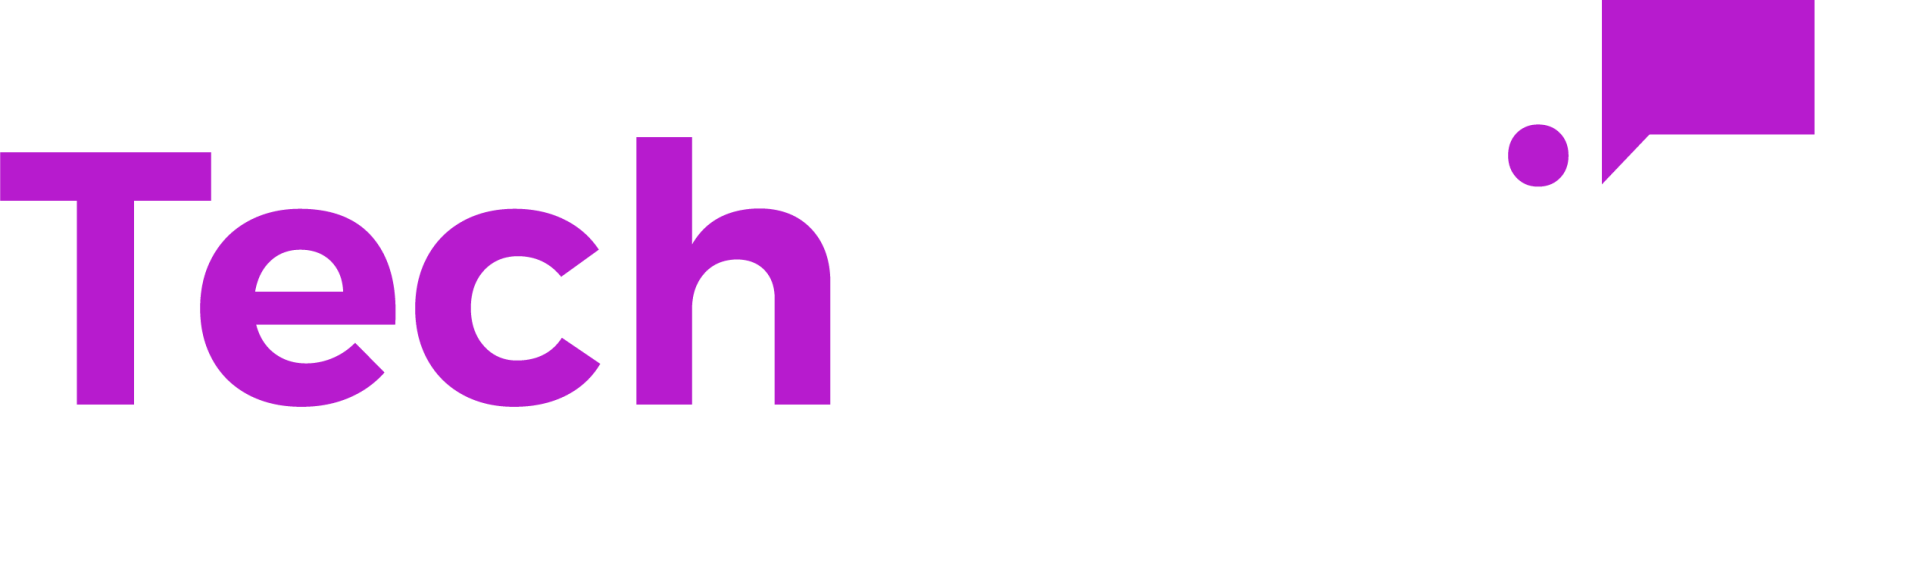 TechAssist Business IT Support Subscription Service